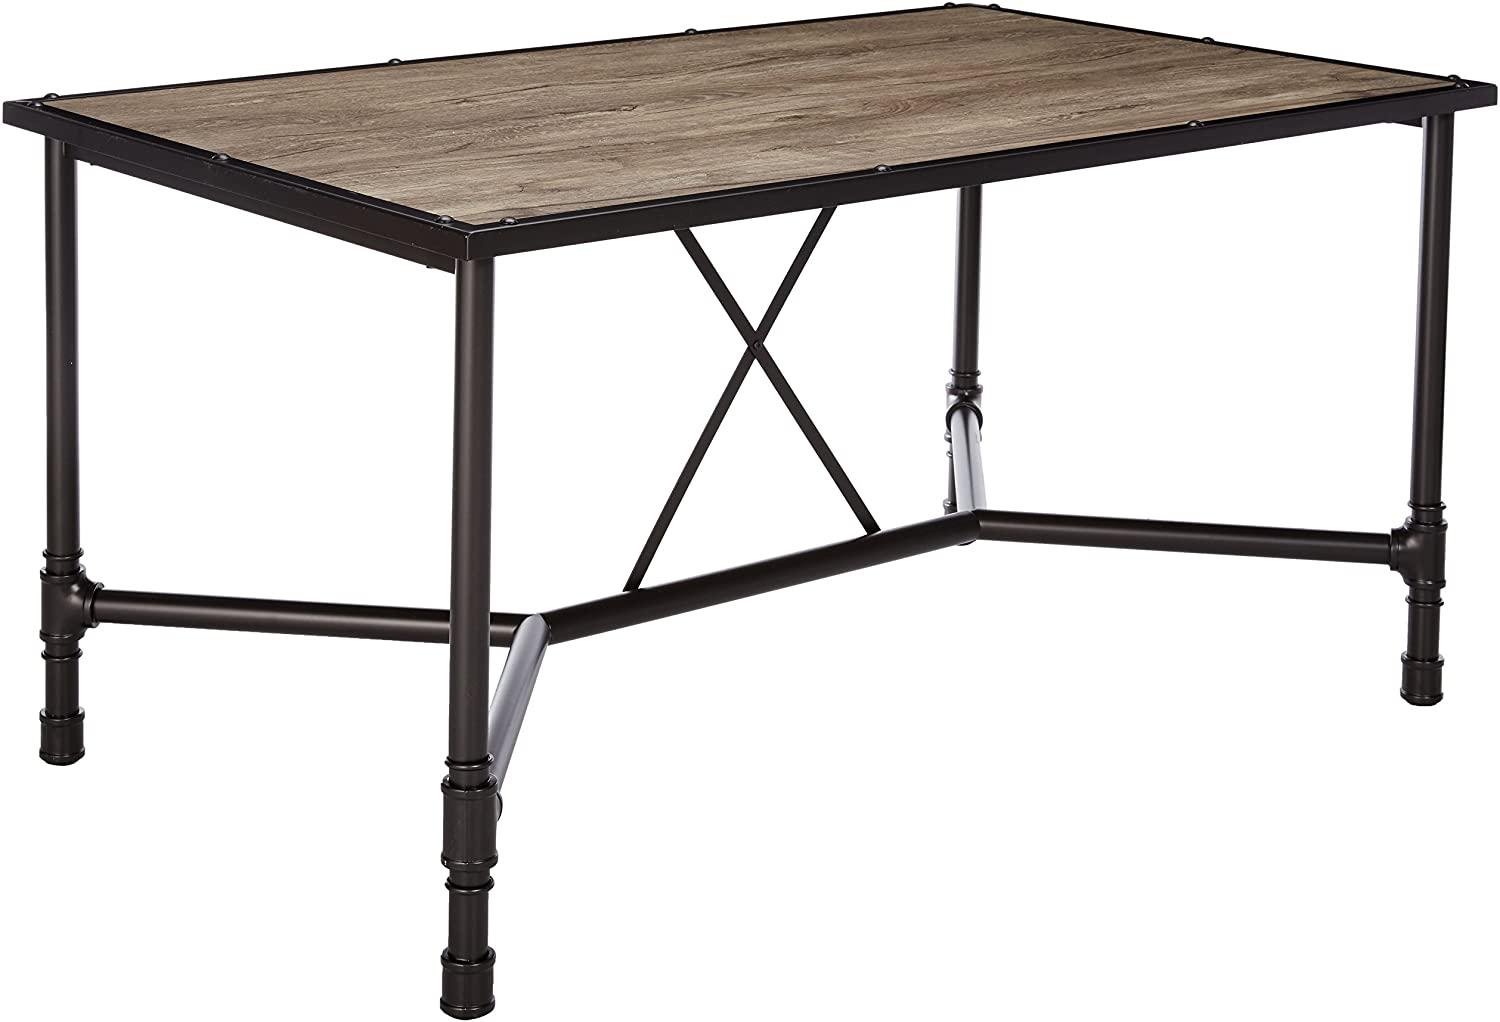 

    
Contemporary Rustic Oak & Black Dining Table by Acme Caitlin 72035
